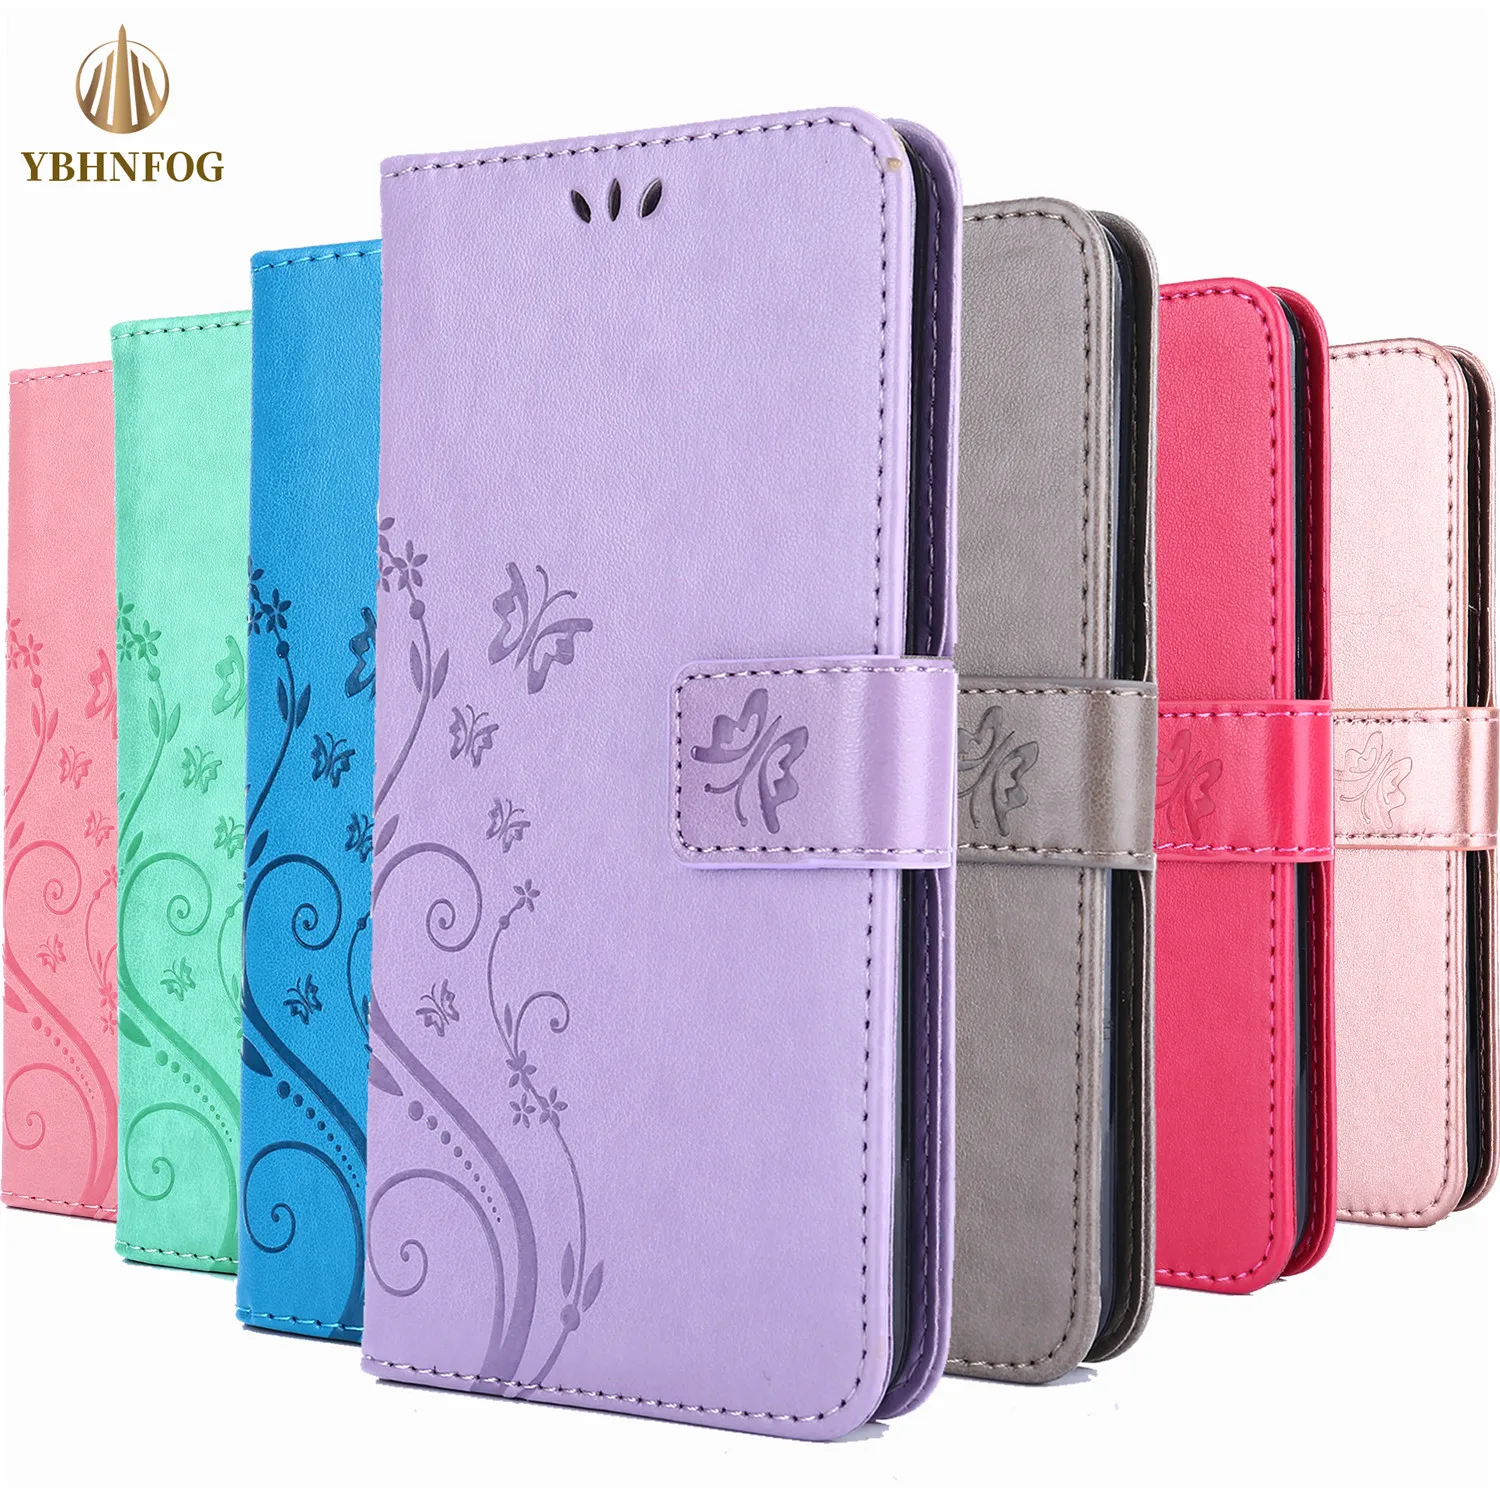 S8 S9 Plus S10 S20 FE S21 S22 Ultra S7 Edge Leather Wallet Cover For Samsung Galaxy A32 A42 A52S A72 A12 Holder Flip Stand Case